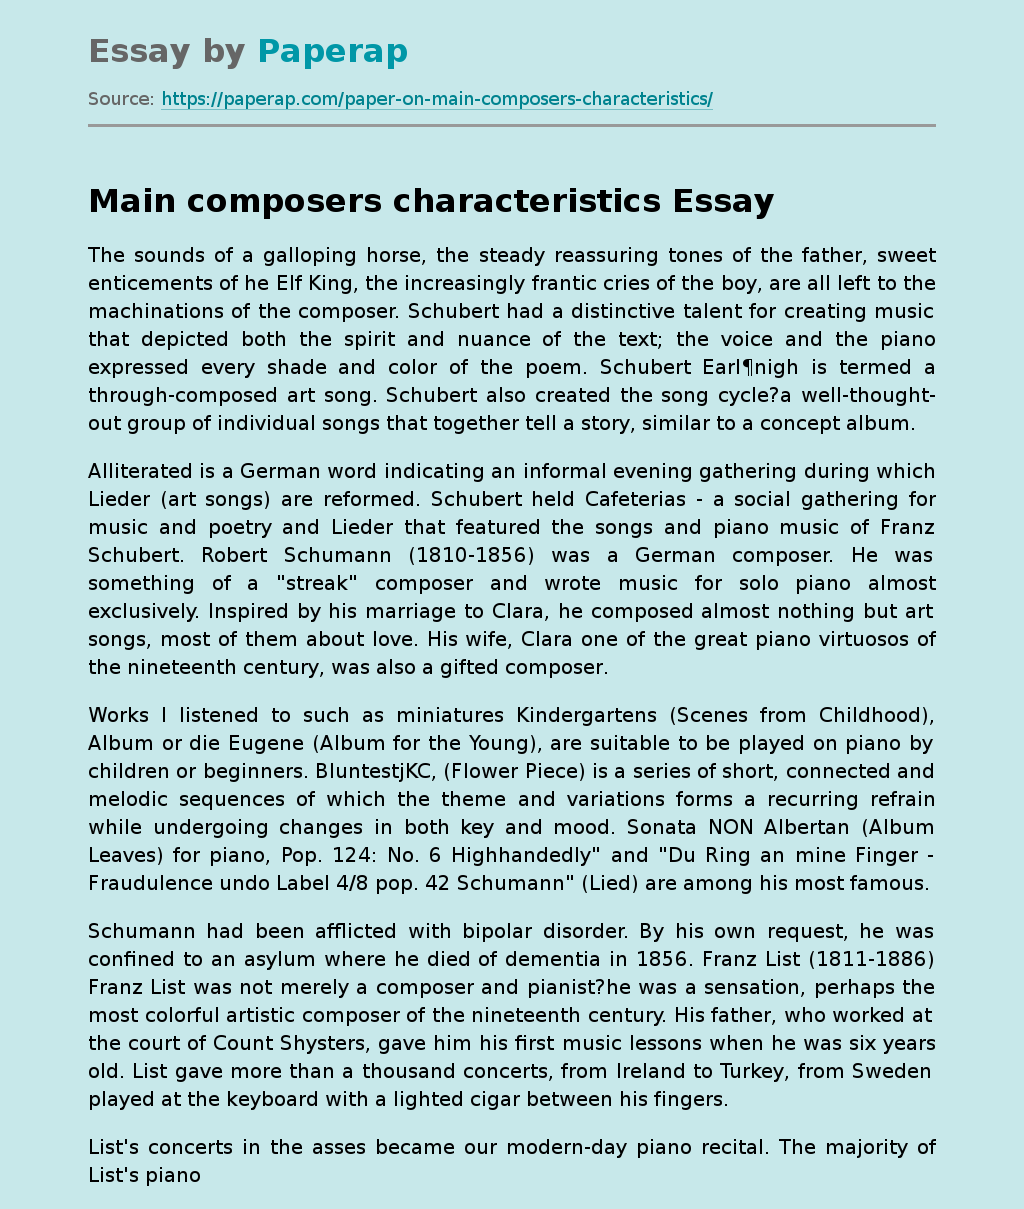 Main Characteristics of Famous Composers